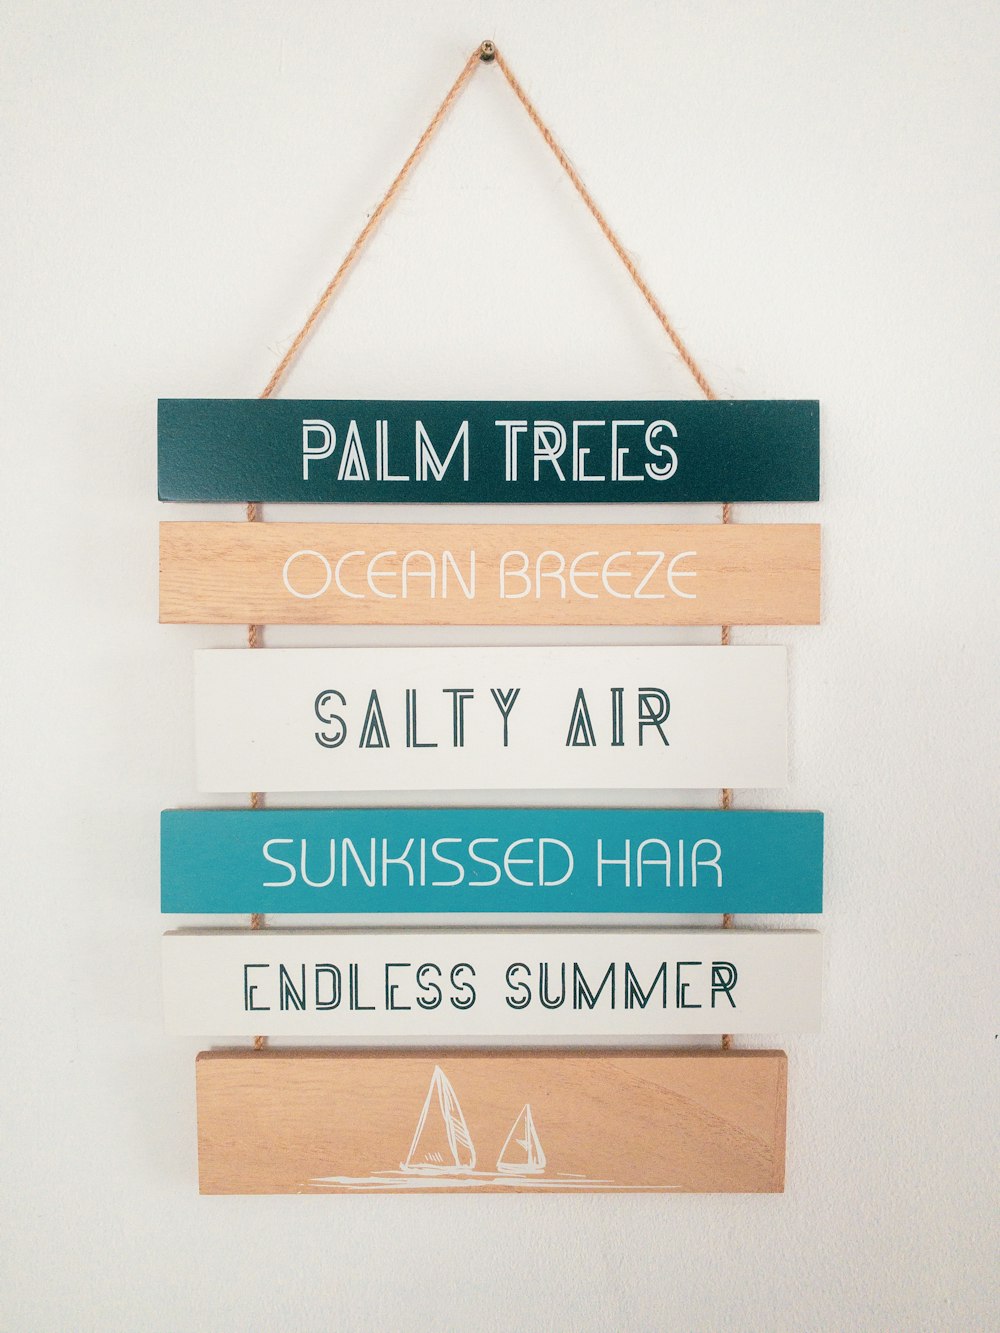 a sign hanging on a wall that says palm trees ocean breeze salty air sunkes